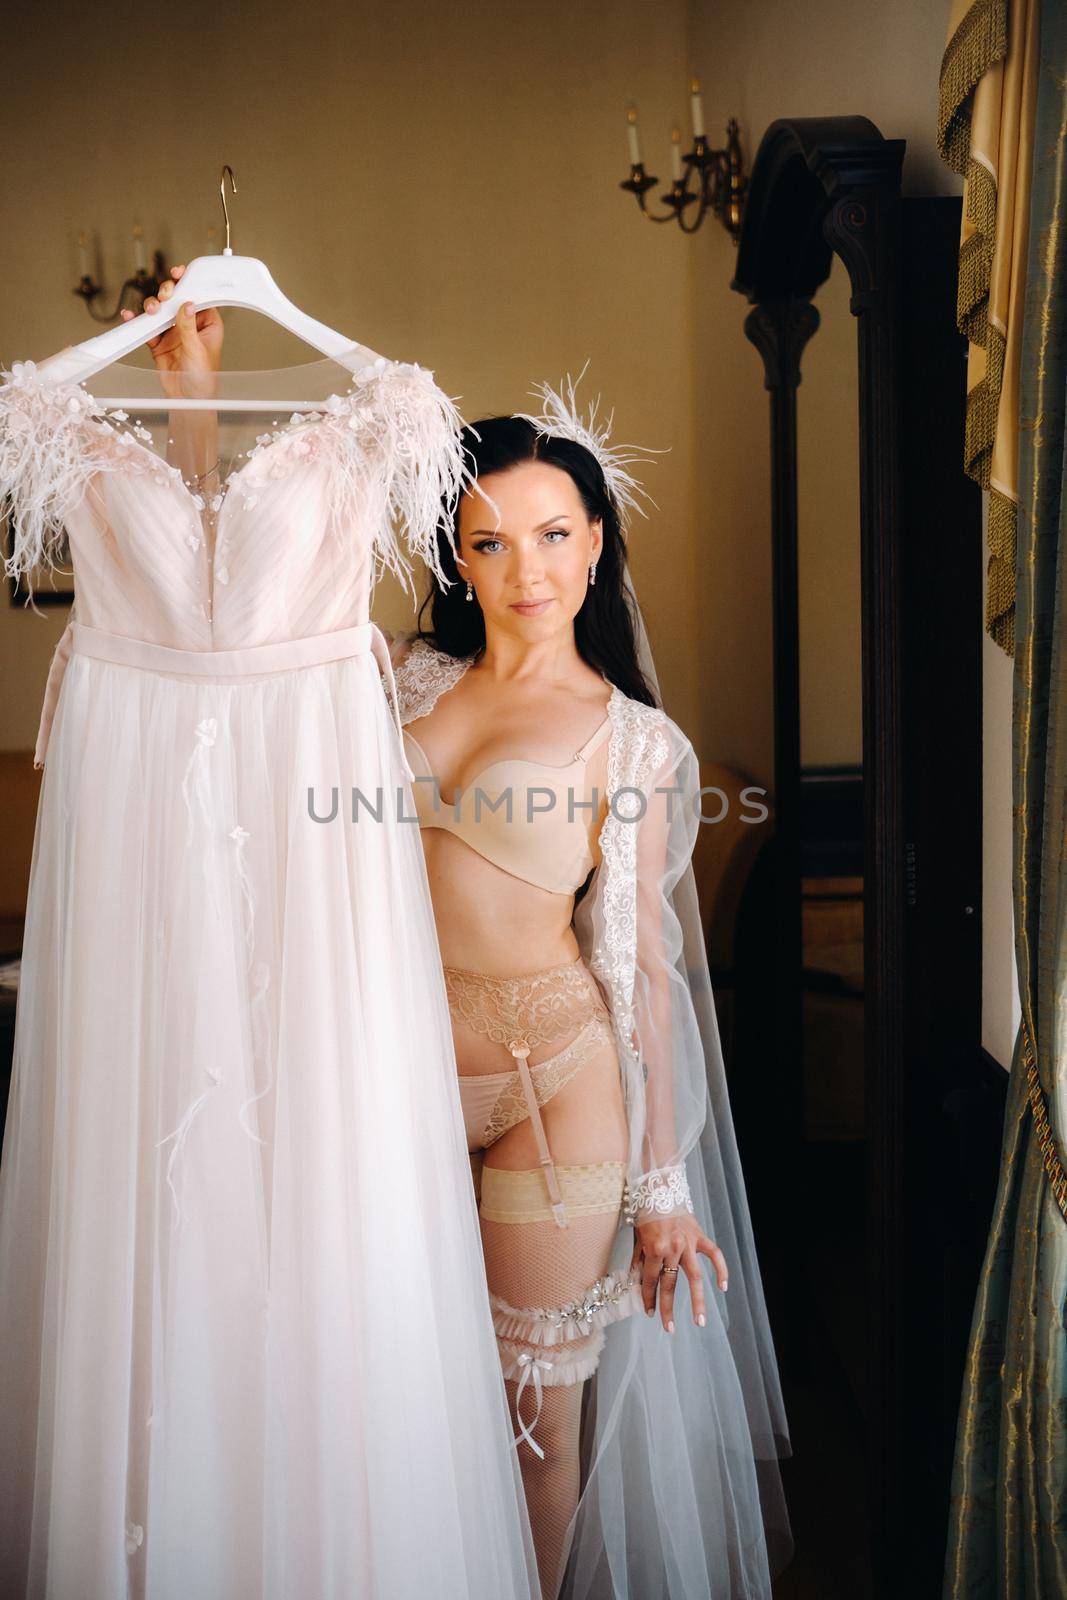 a bride dressed in a boudoir transparent dress and underwear holds her wedding dress in her hands in the interior of the house.